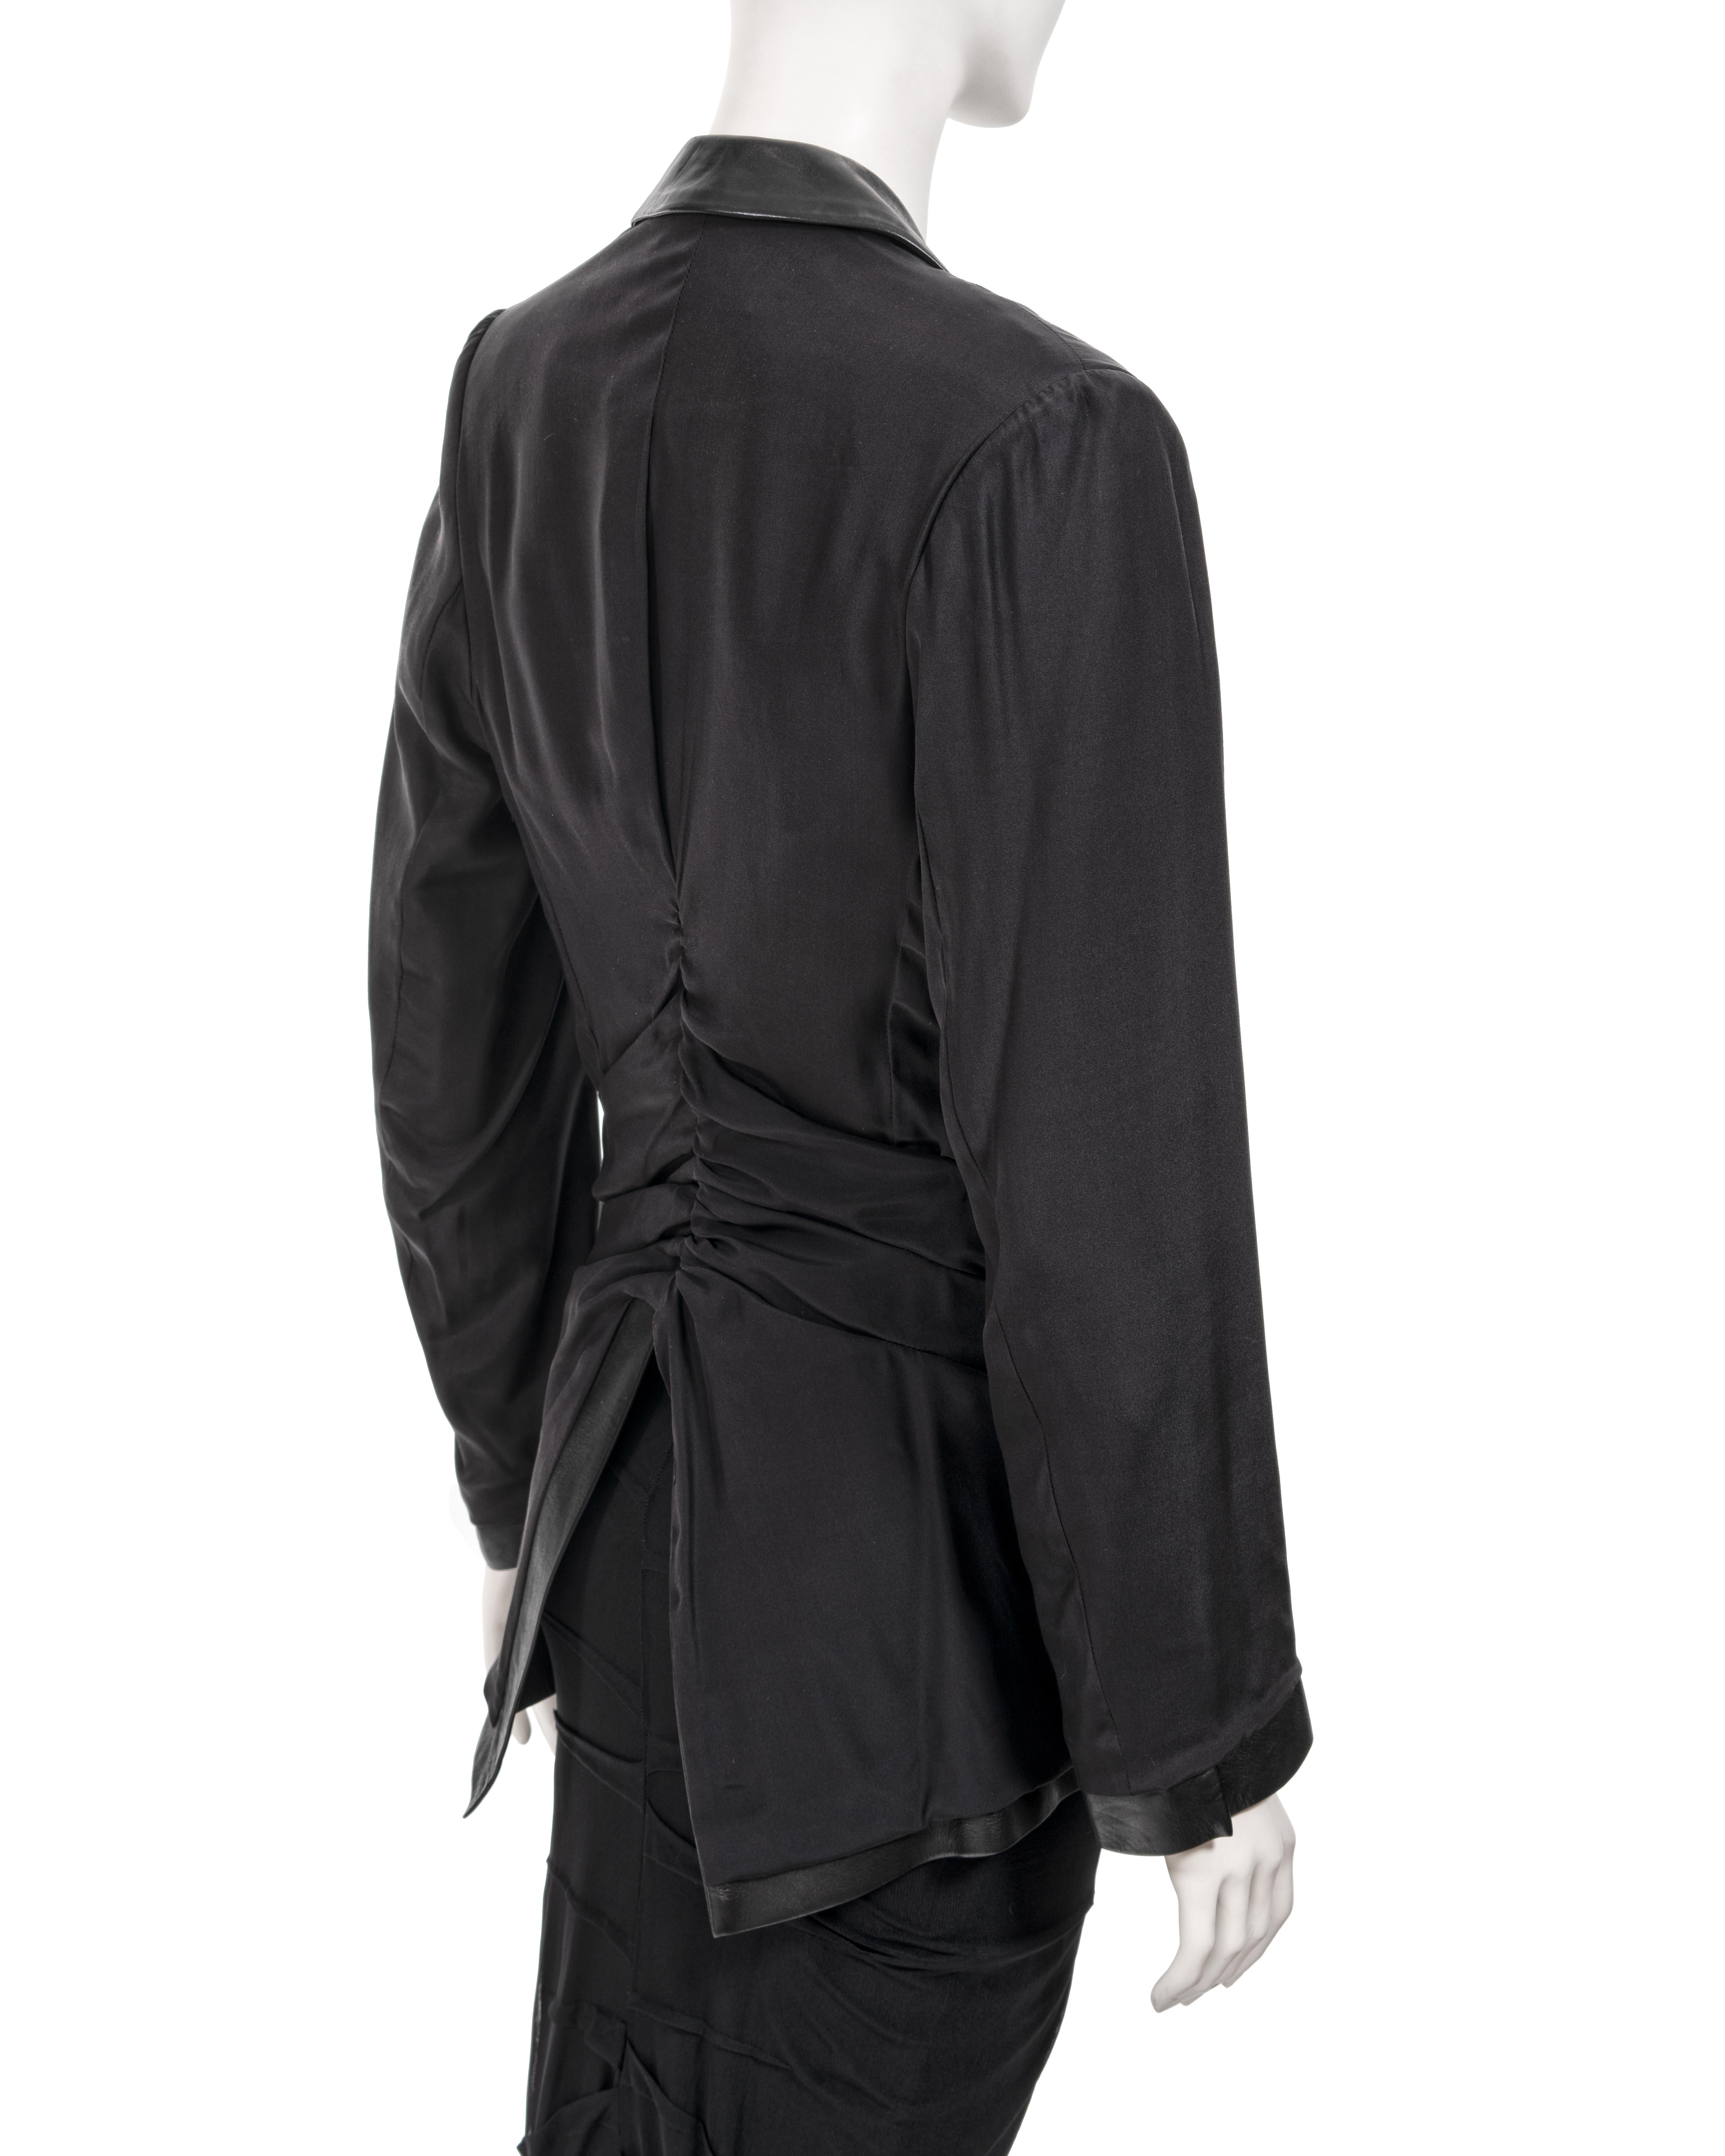 Christian Dior by John Galliano inside-out leather jacket and skirt set, ss 2003 For Sale 10